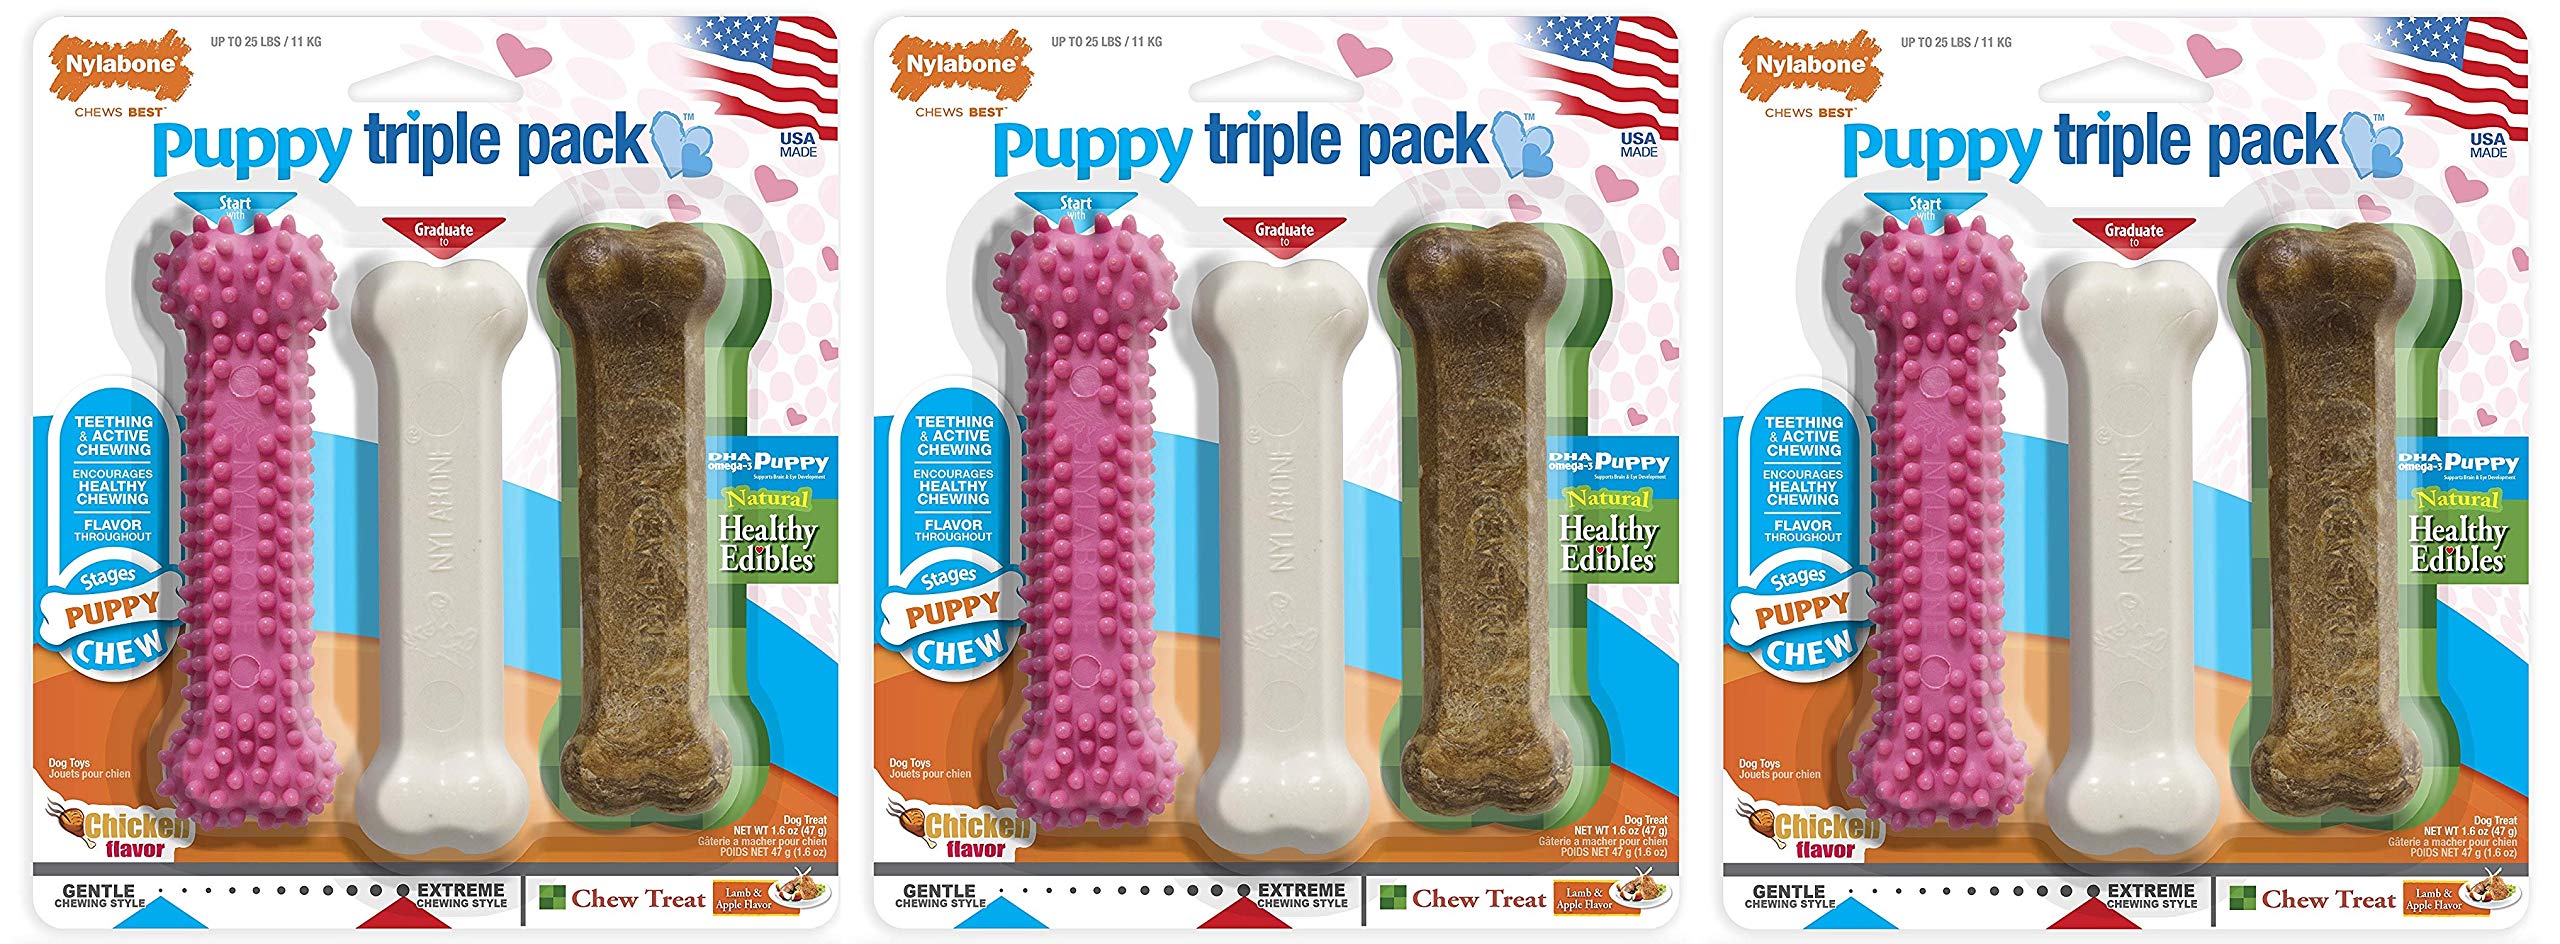 Nylabone 3 Count of Puppy Triple Packs, 2 Toys and 1 Treat Each, Made in The USA3